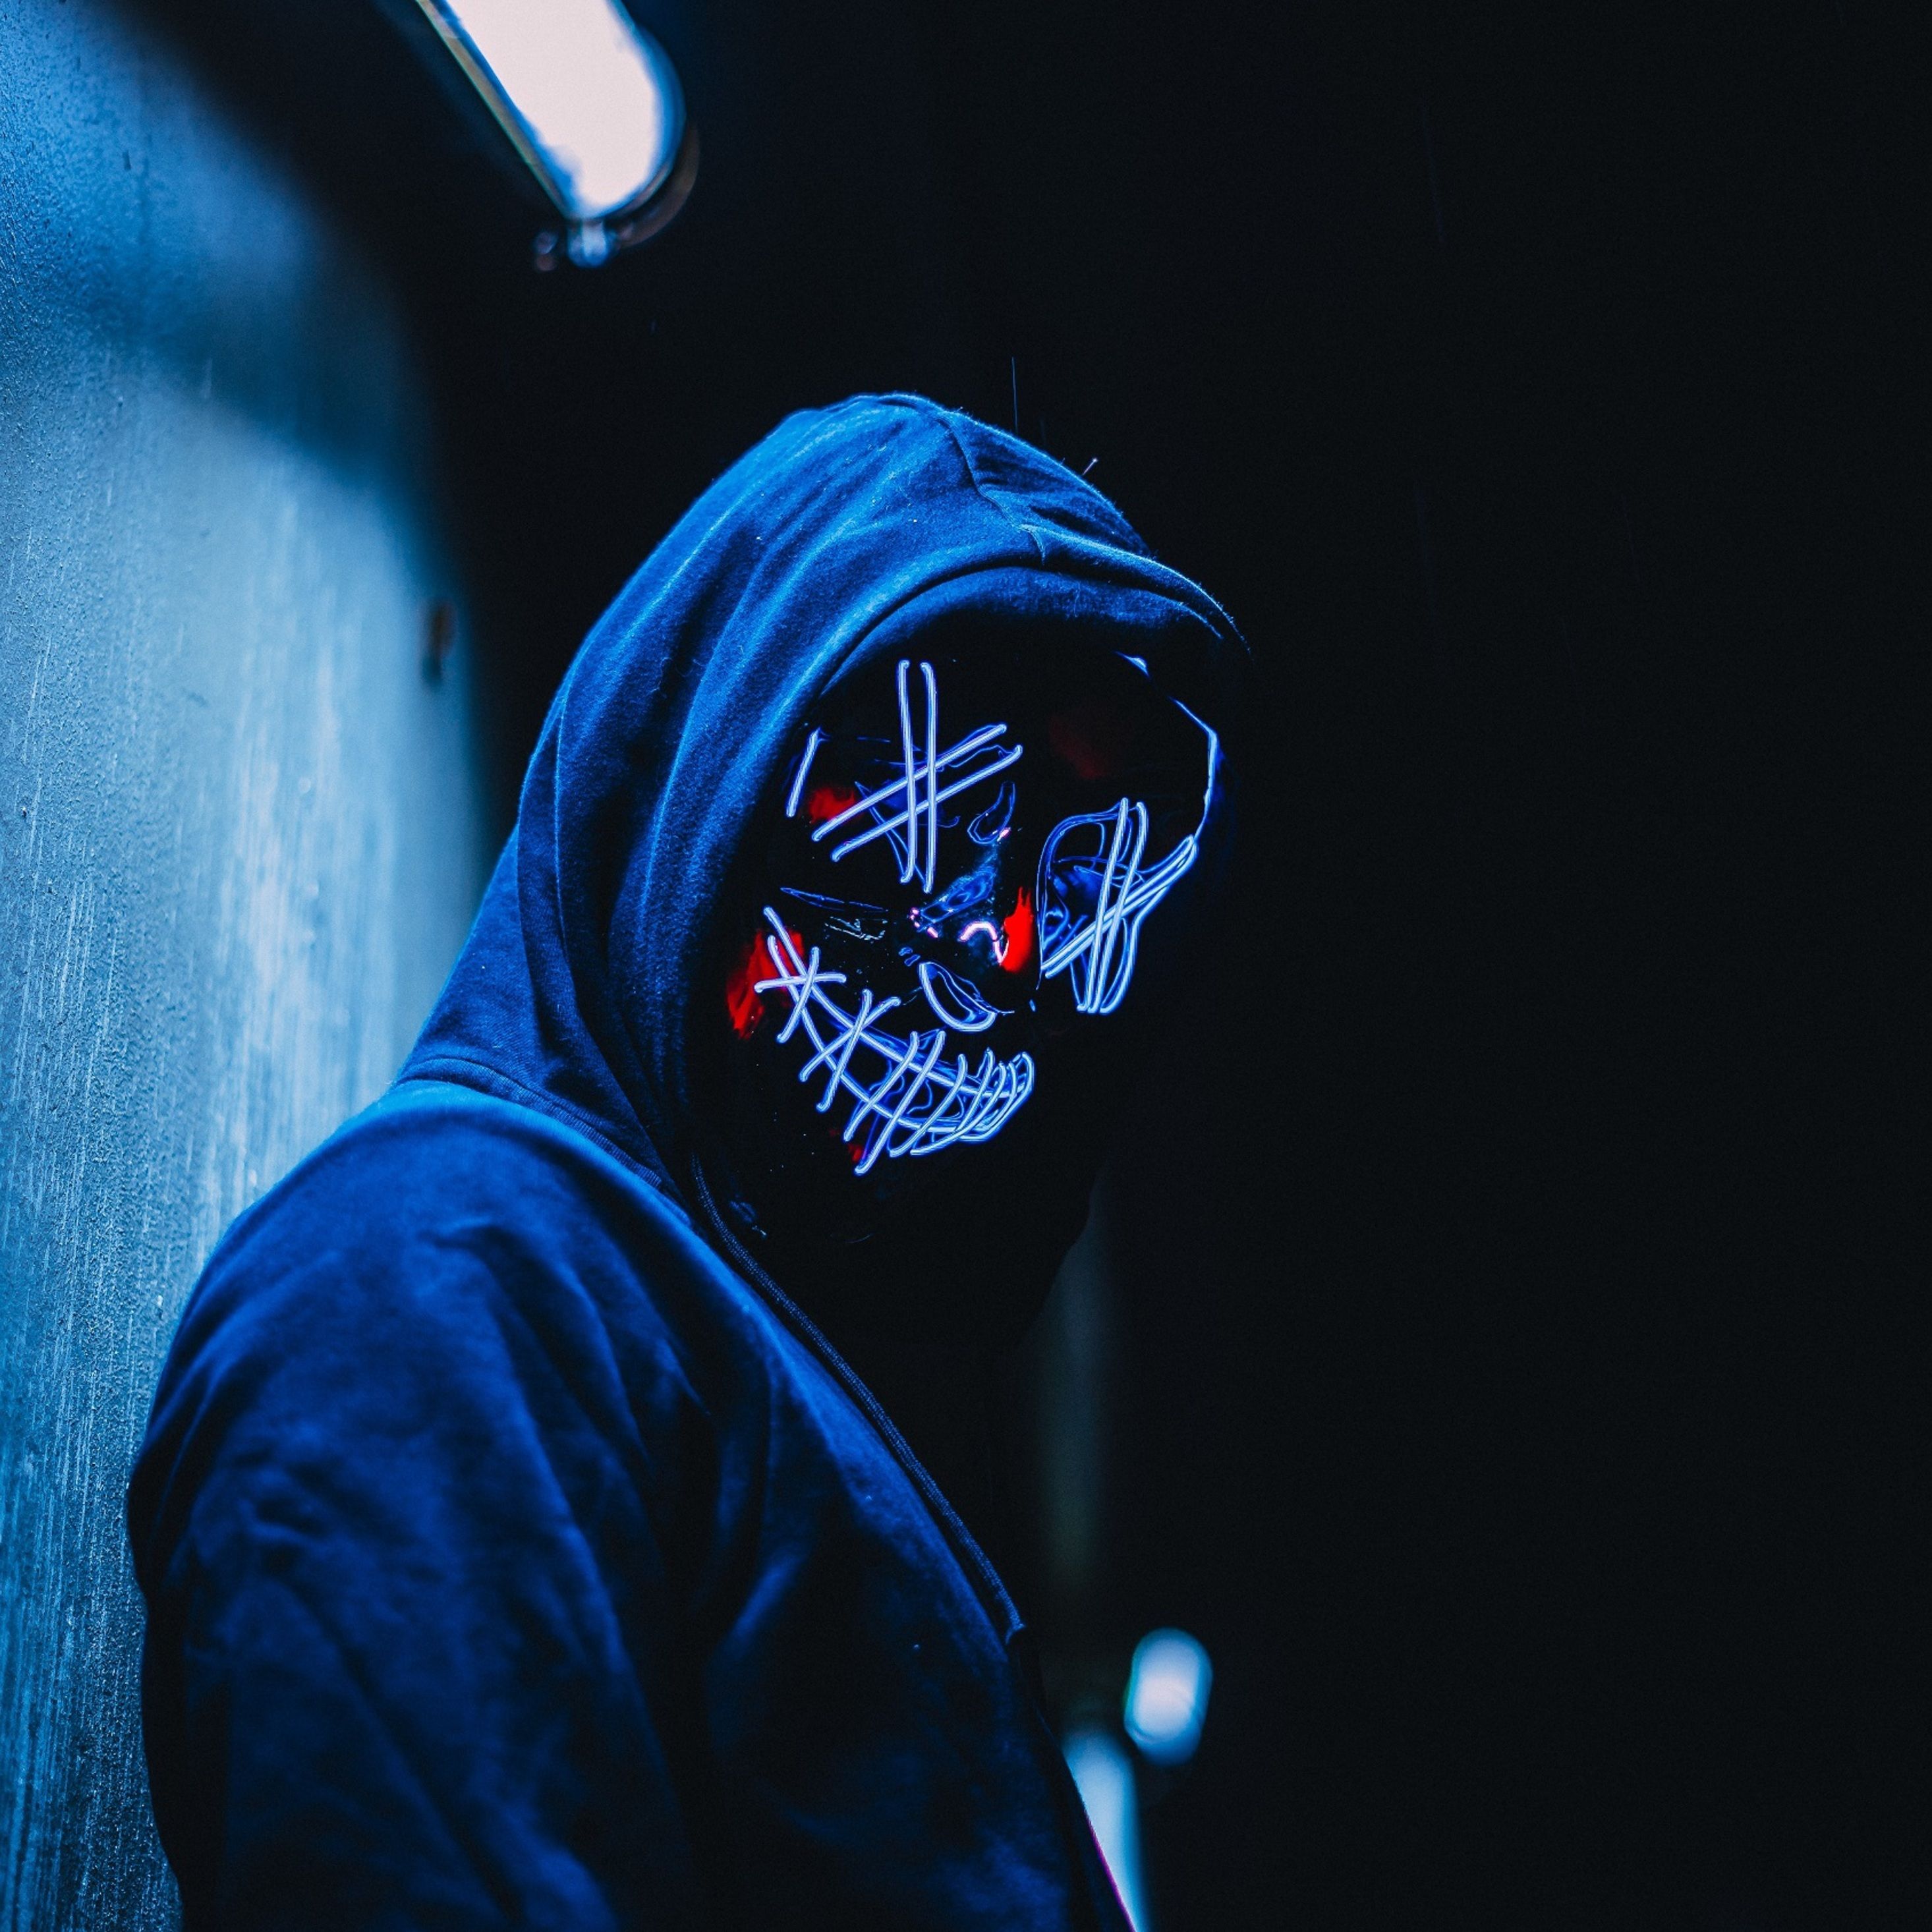 Hoodie Mask Guy iPad Pro Retina Display HD 4k Wallpaper, Image, Background, Photo and Picture